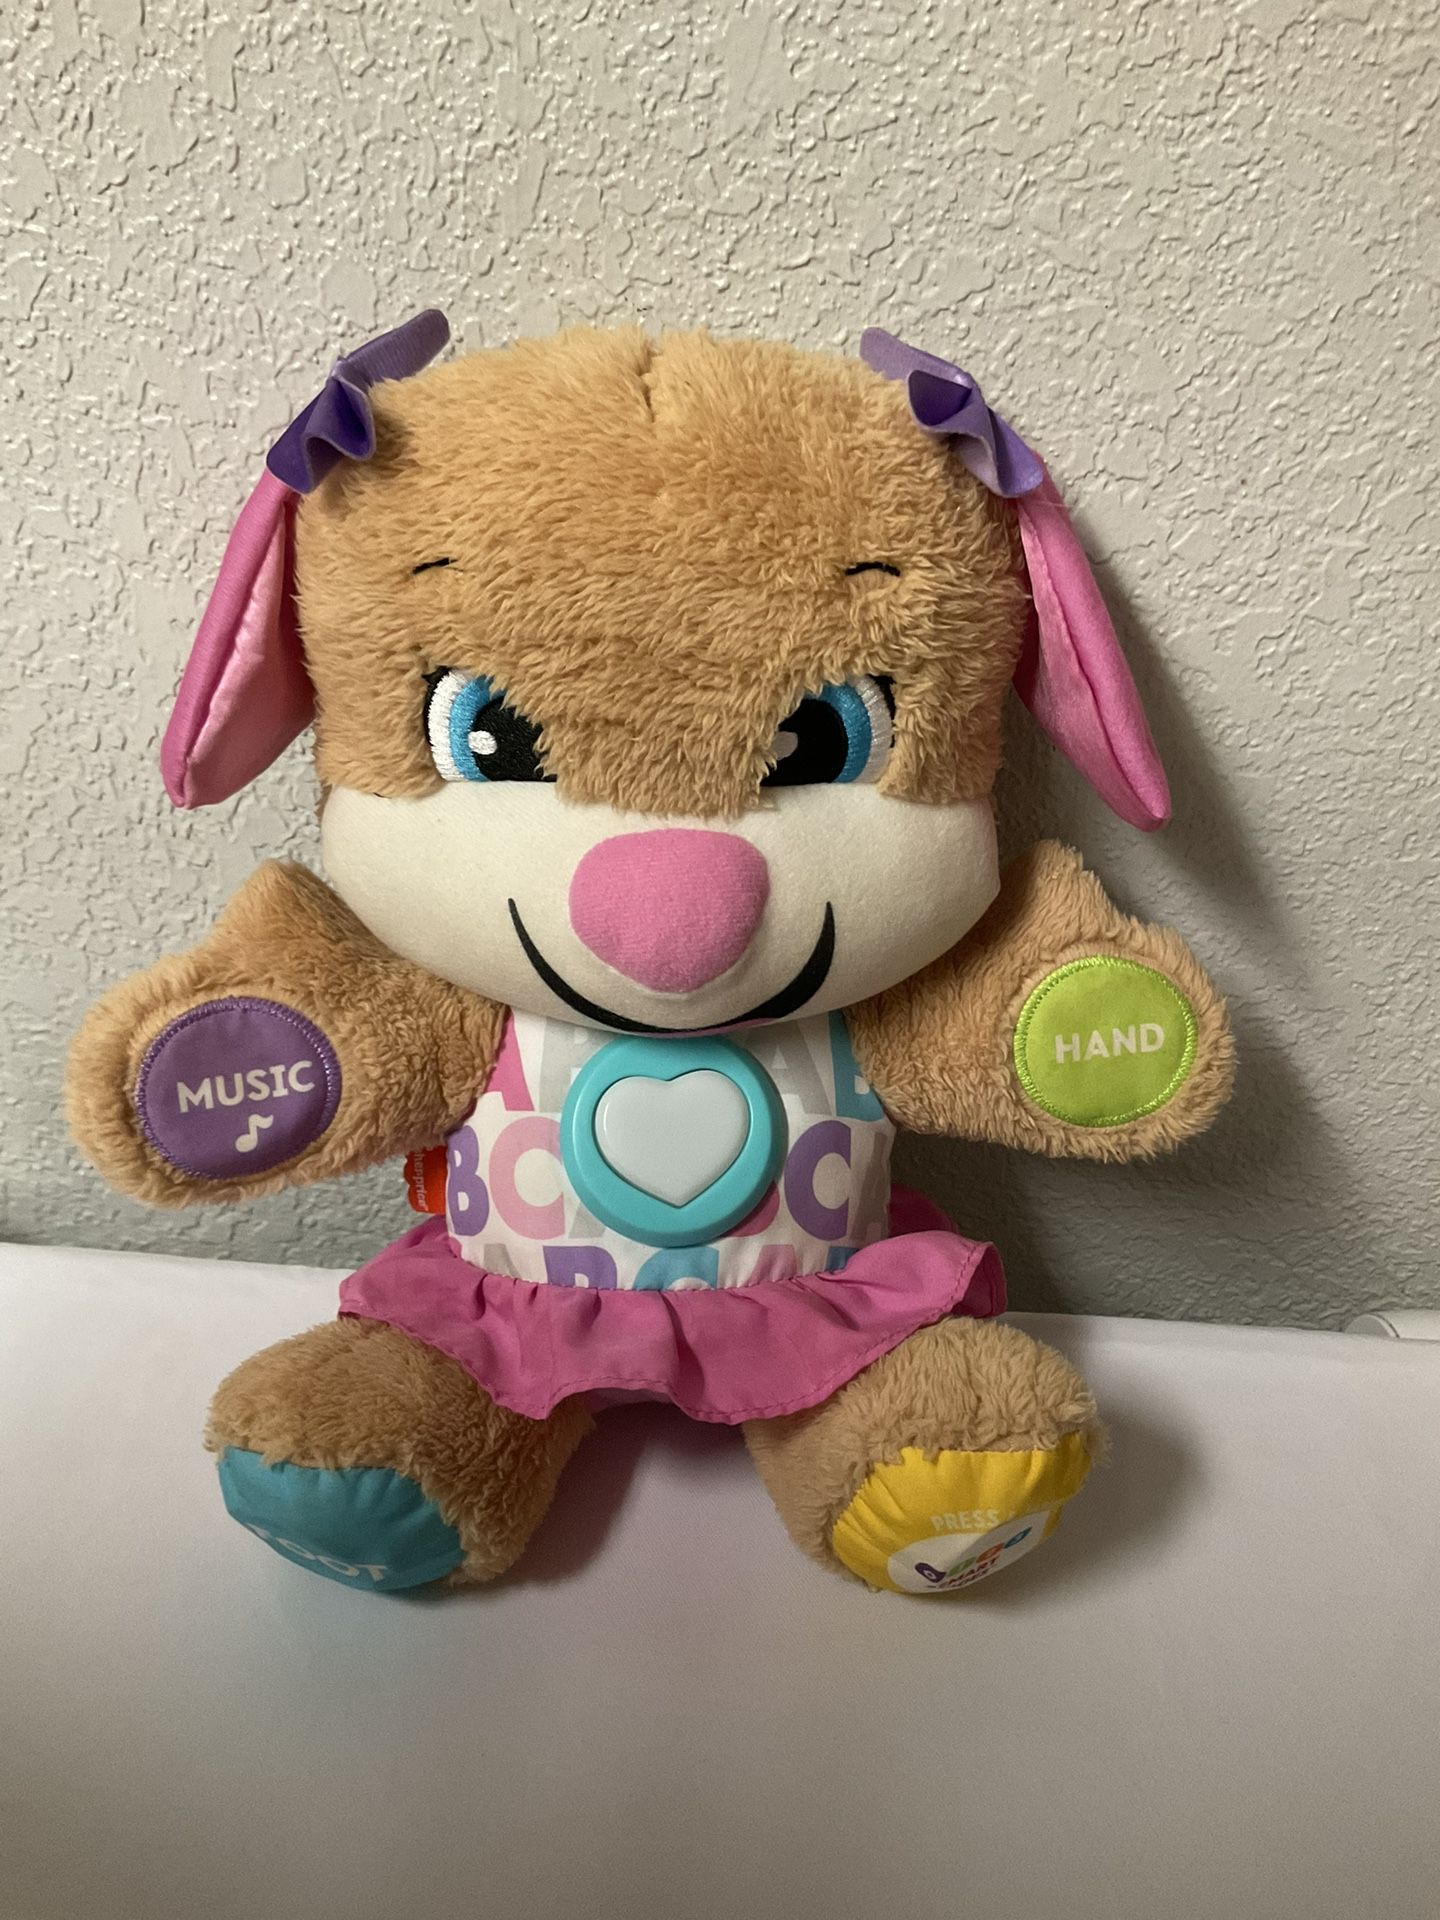 Fisher Price Laugh And Learn Smart Stages Puppy Educational Toy For Girls Kids.